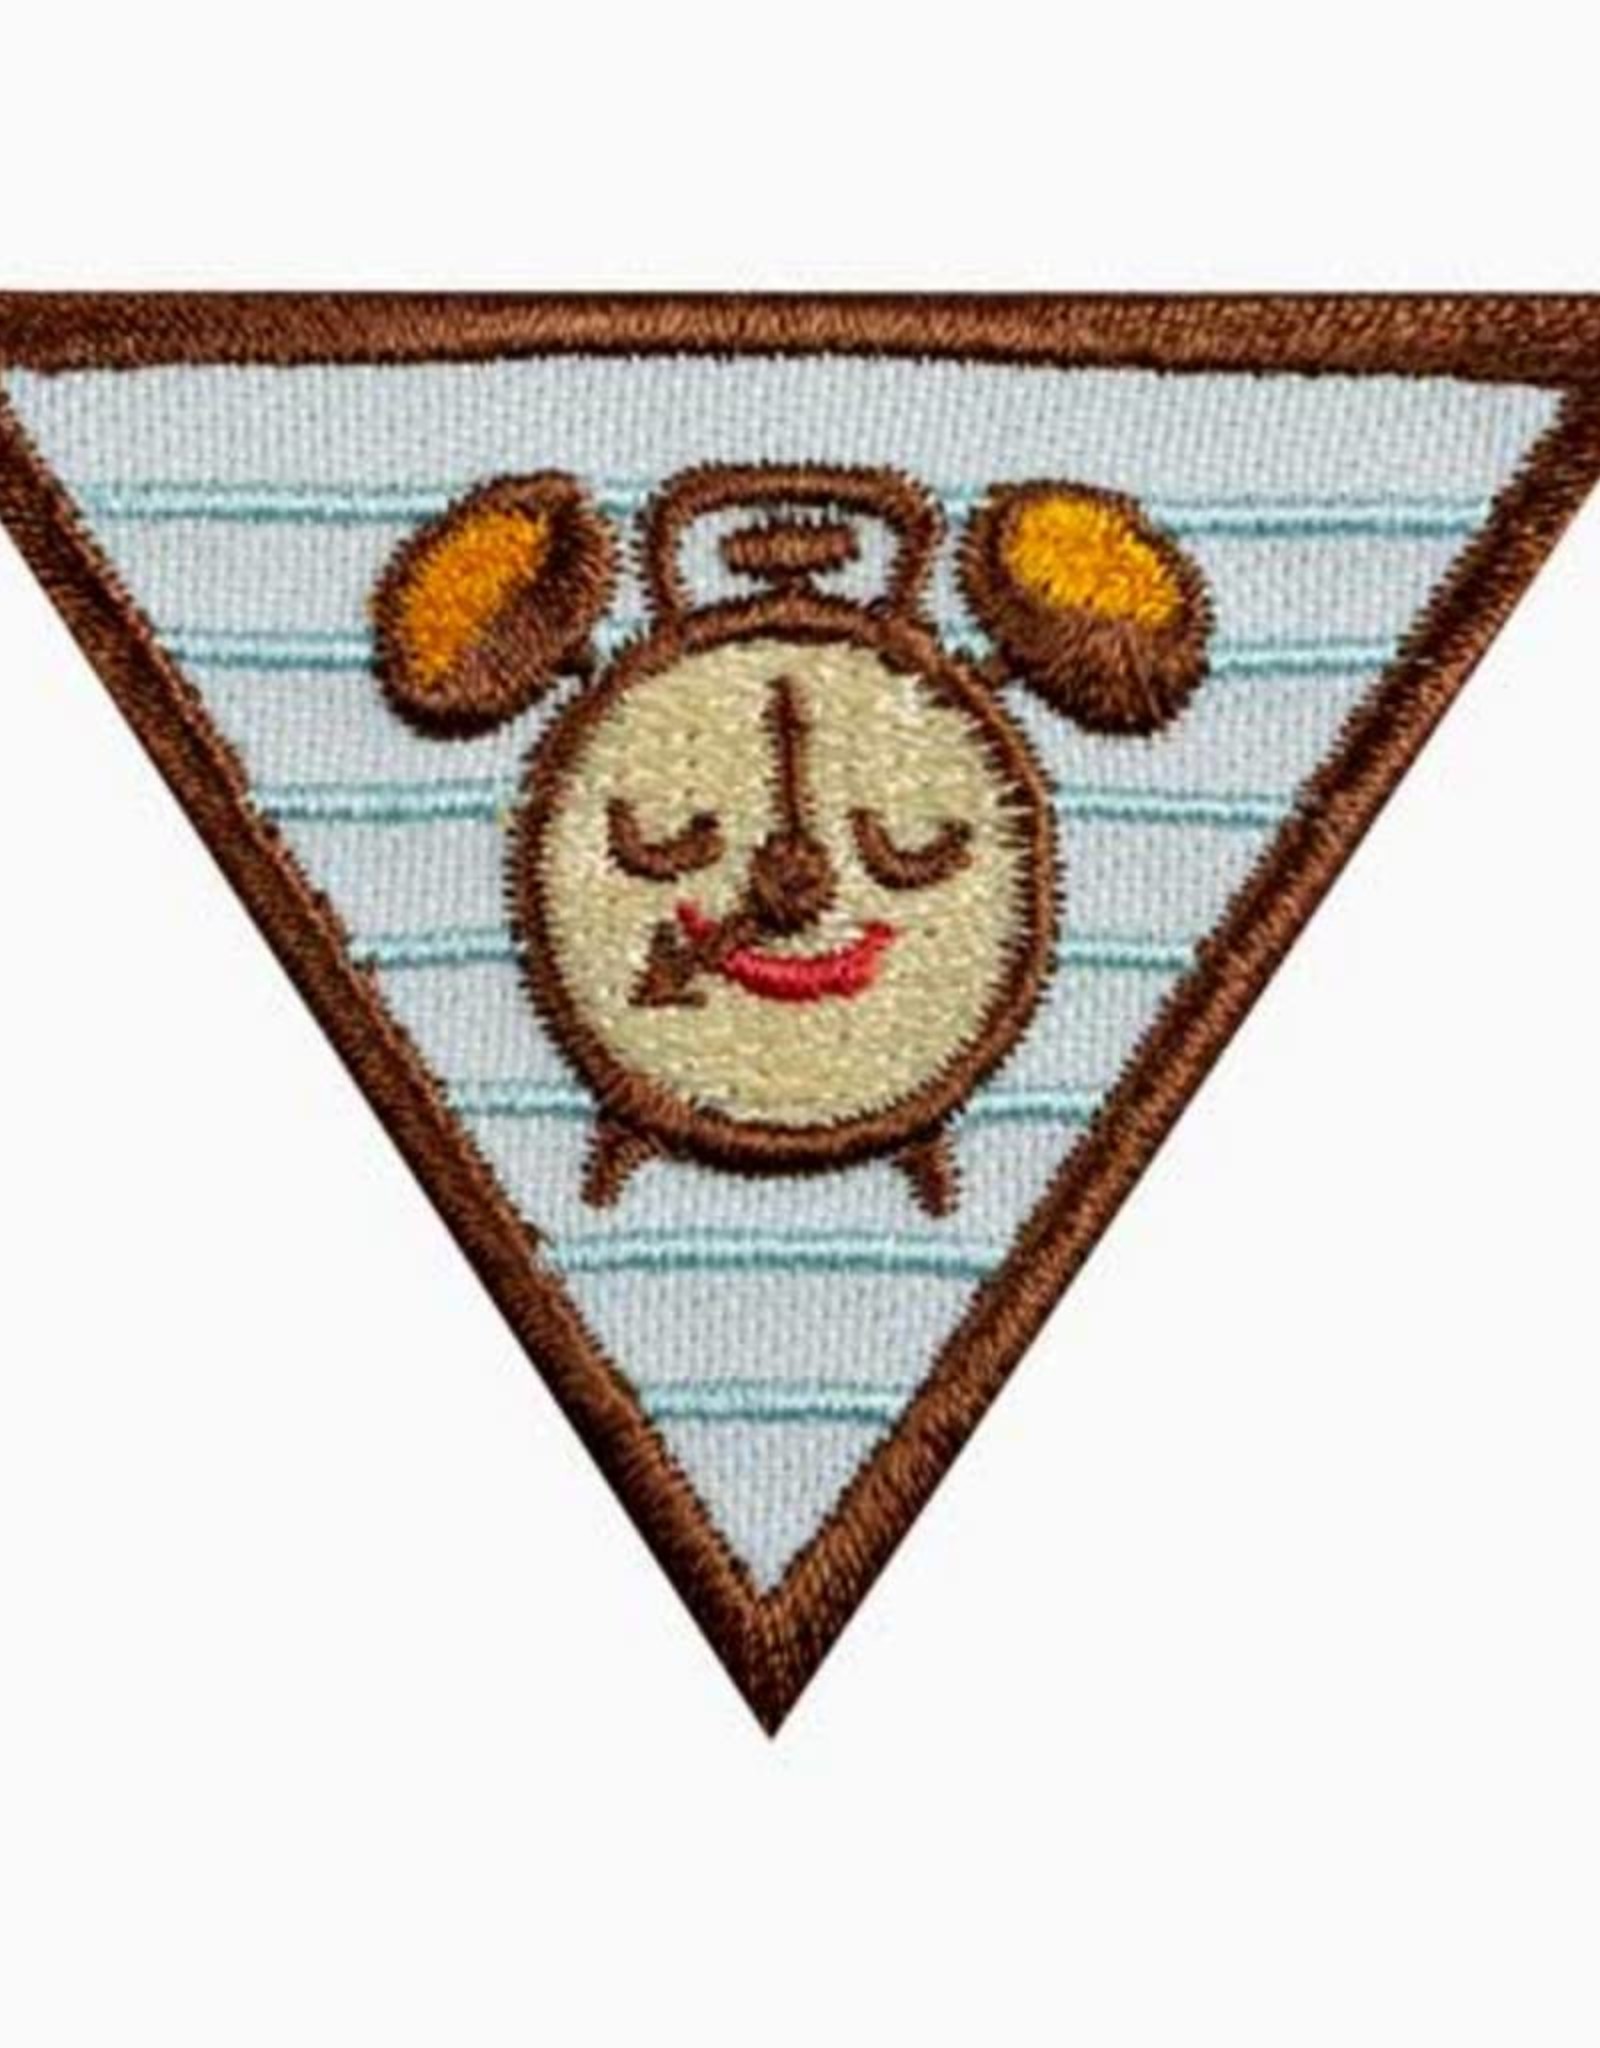 GIRL SCOUTS OF THE USA Brownie My Great Day Badge